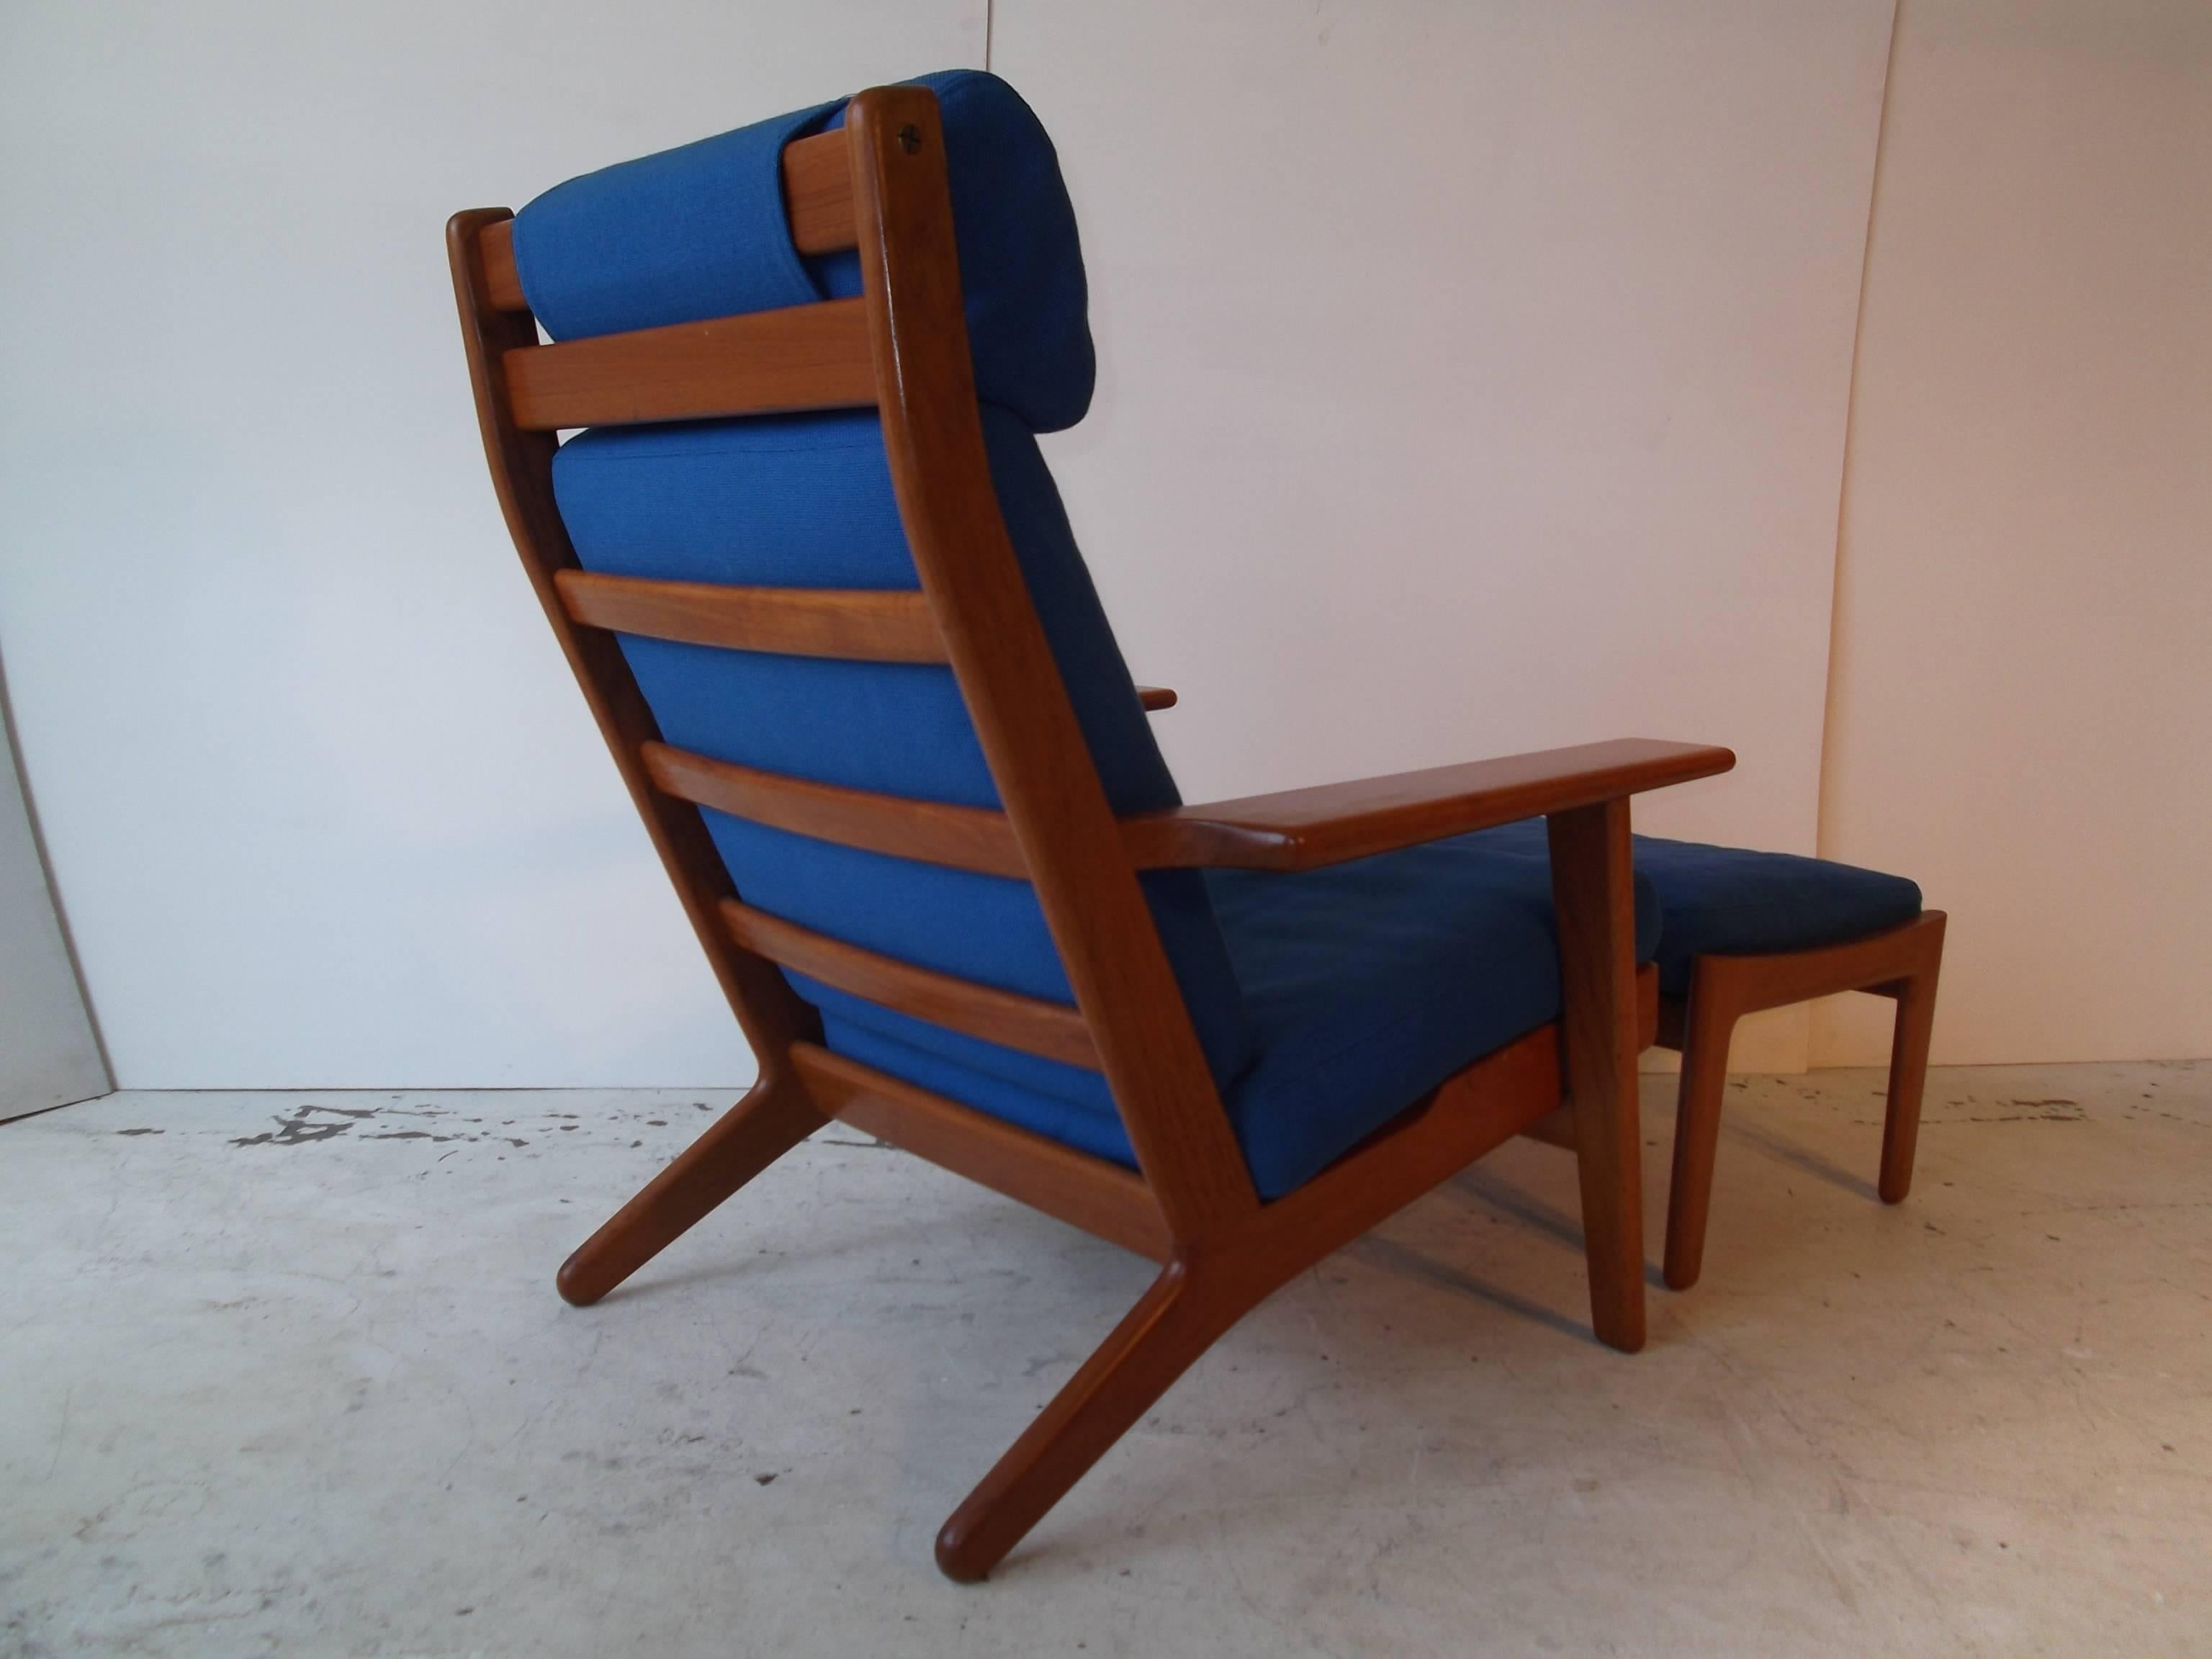 This is a beautiful and clean original Hans Wegner high back lounge chair with its original footrest ottoman. They are out of one owner loving home, in their Orig. Blue wool fabric. Both pieces are solid darker teak. They are vintage from circa